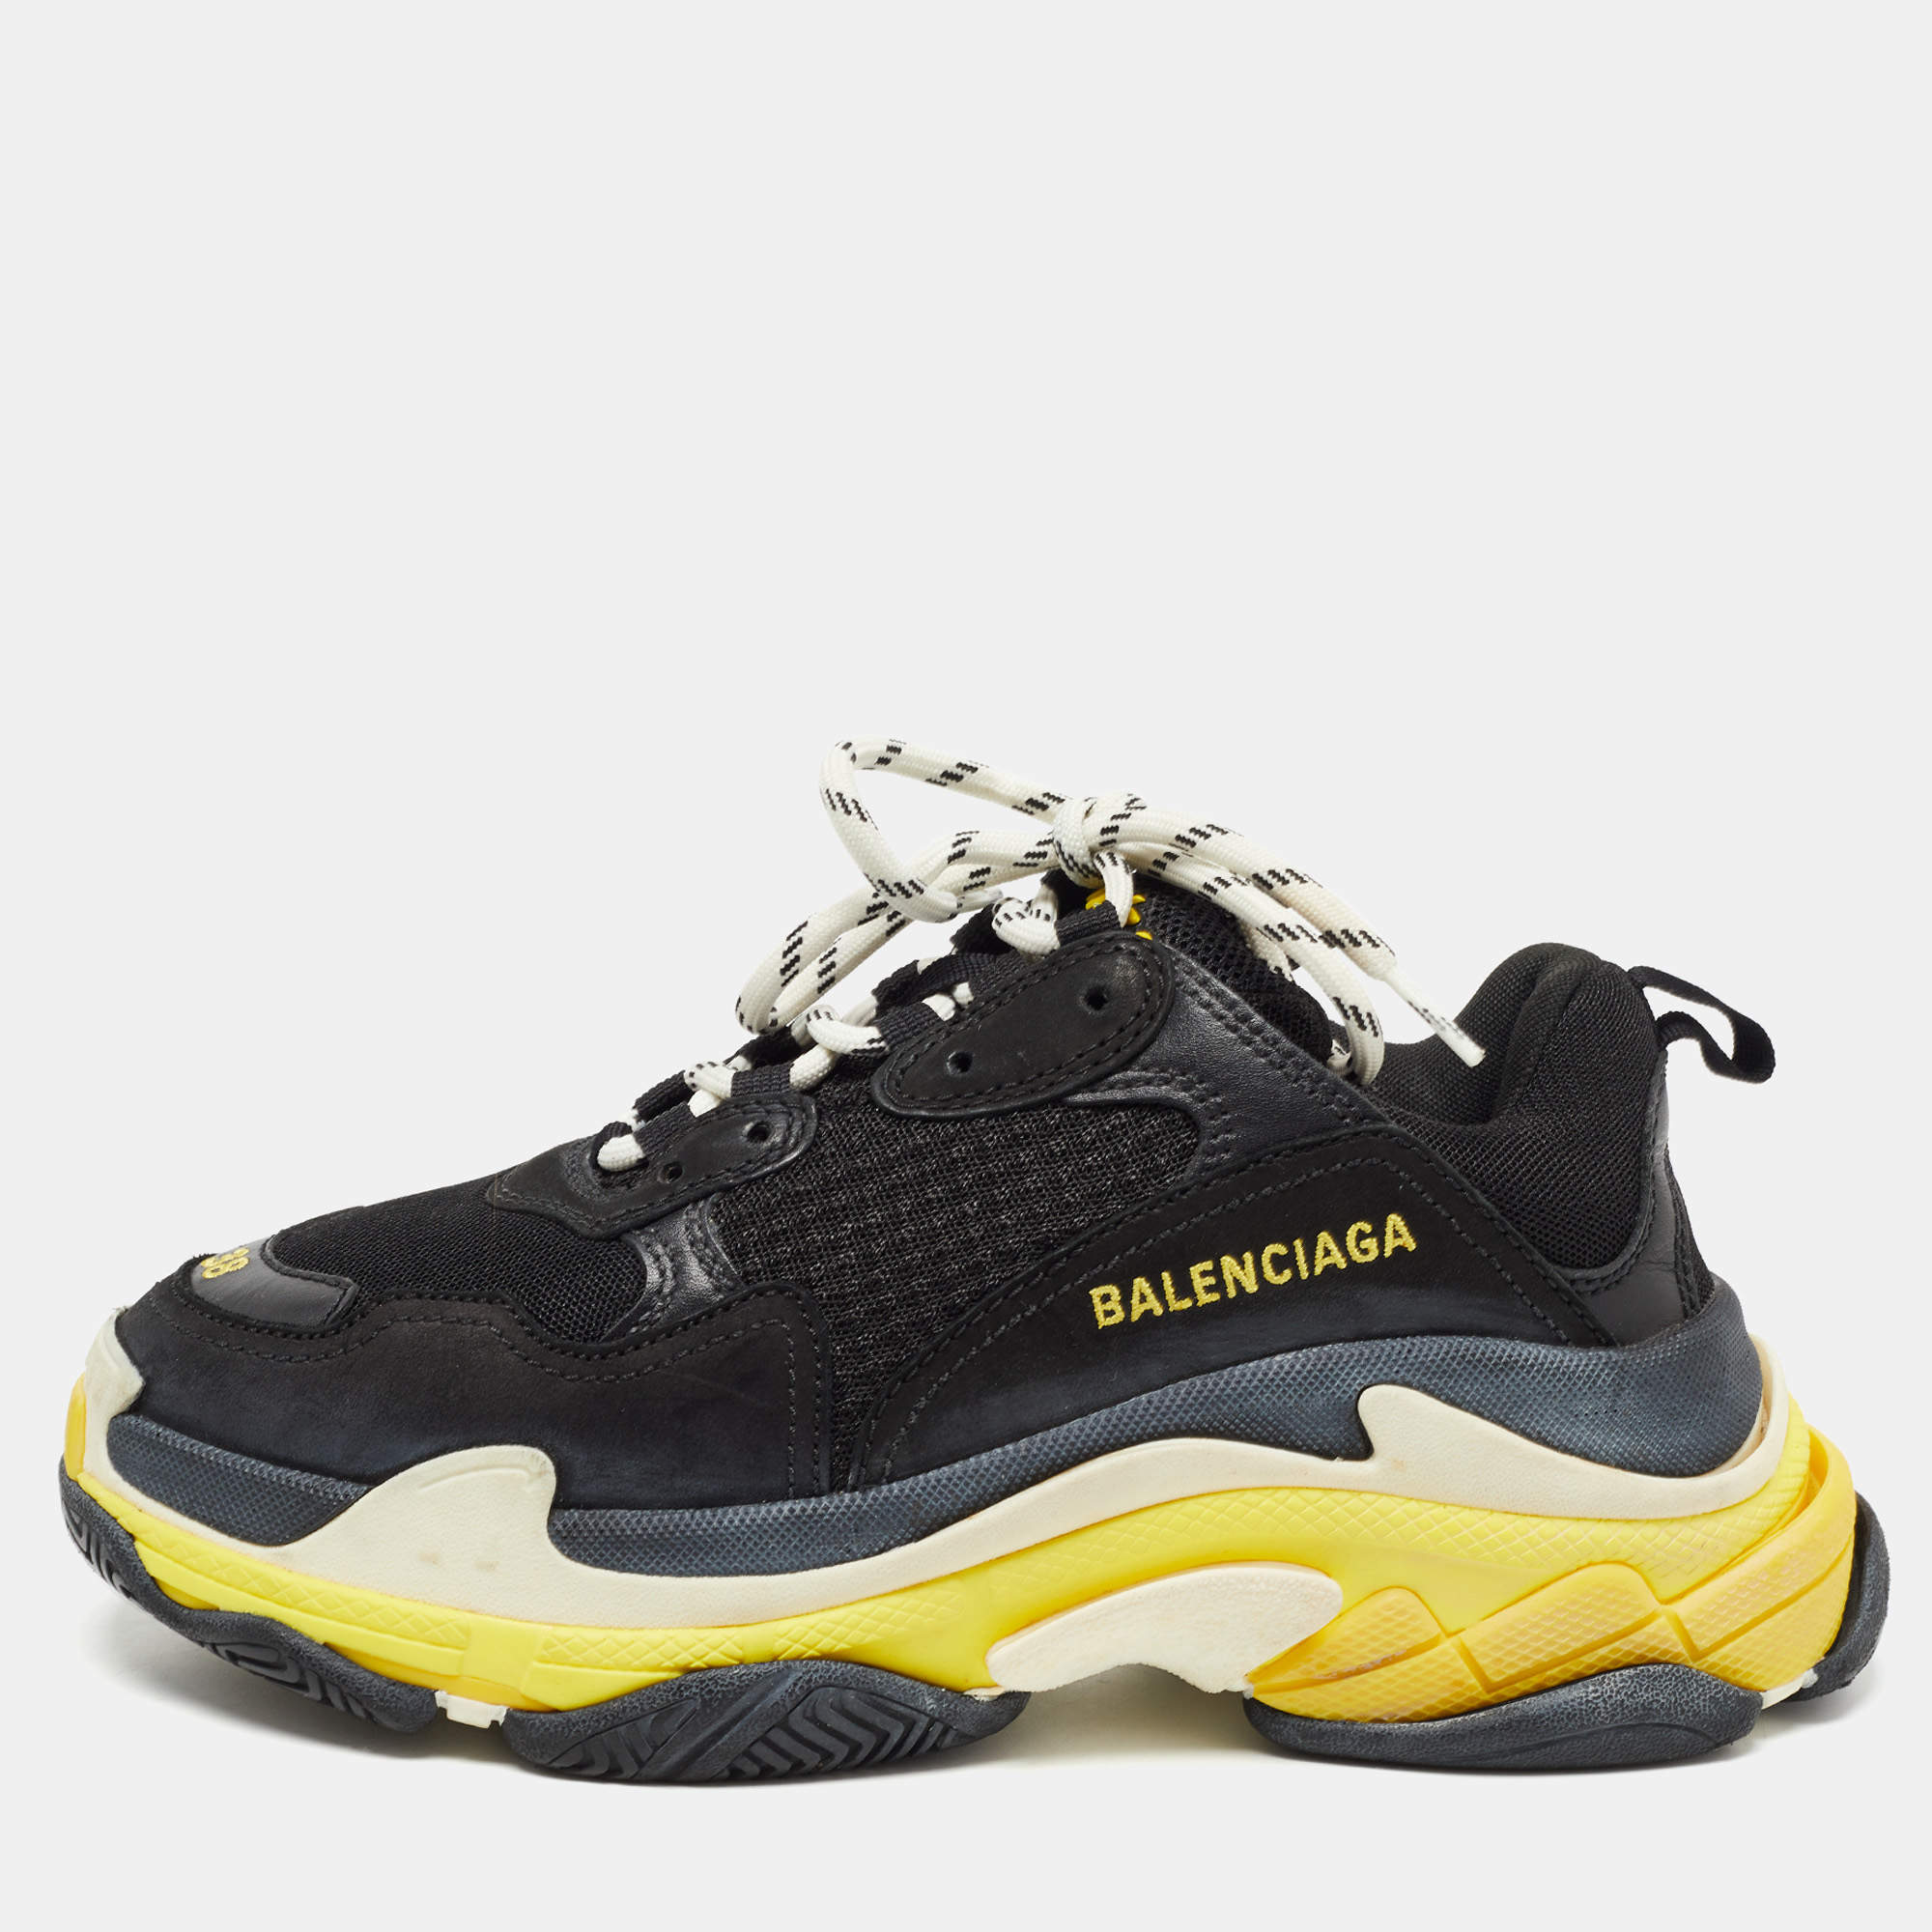 Balenciaga Has S26K WornOut Sneakers That Resemble School Shoes Mum  Wouldve Scolded Us For Wearing